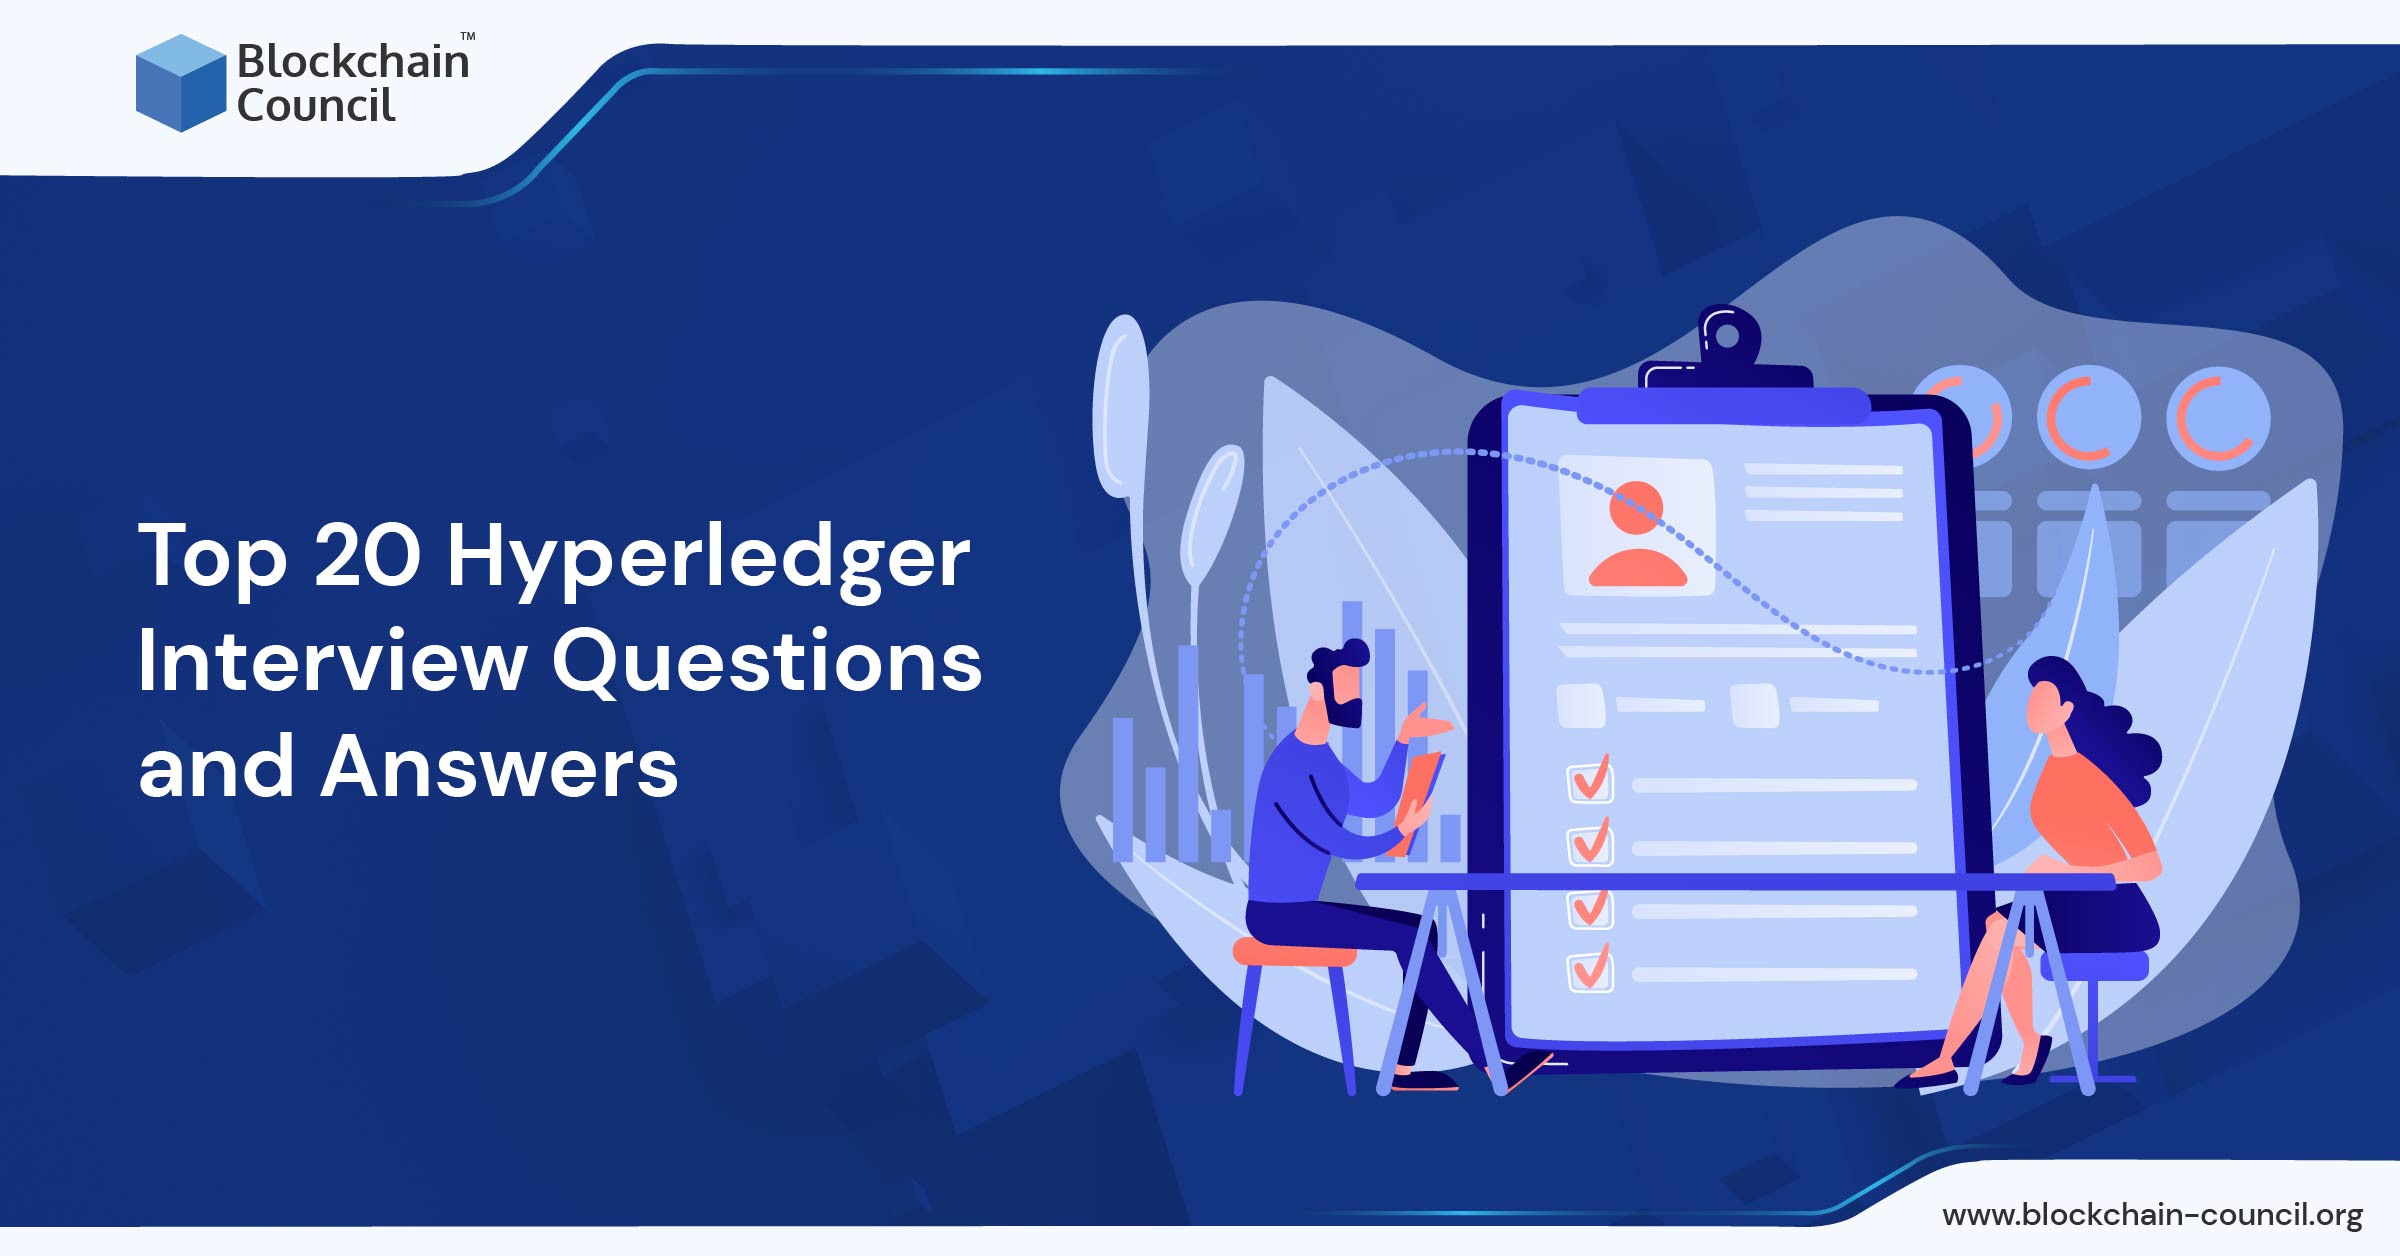 Top 20 Hyperledger Interview Questions and Answers